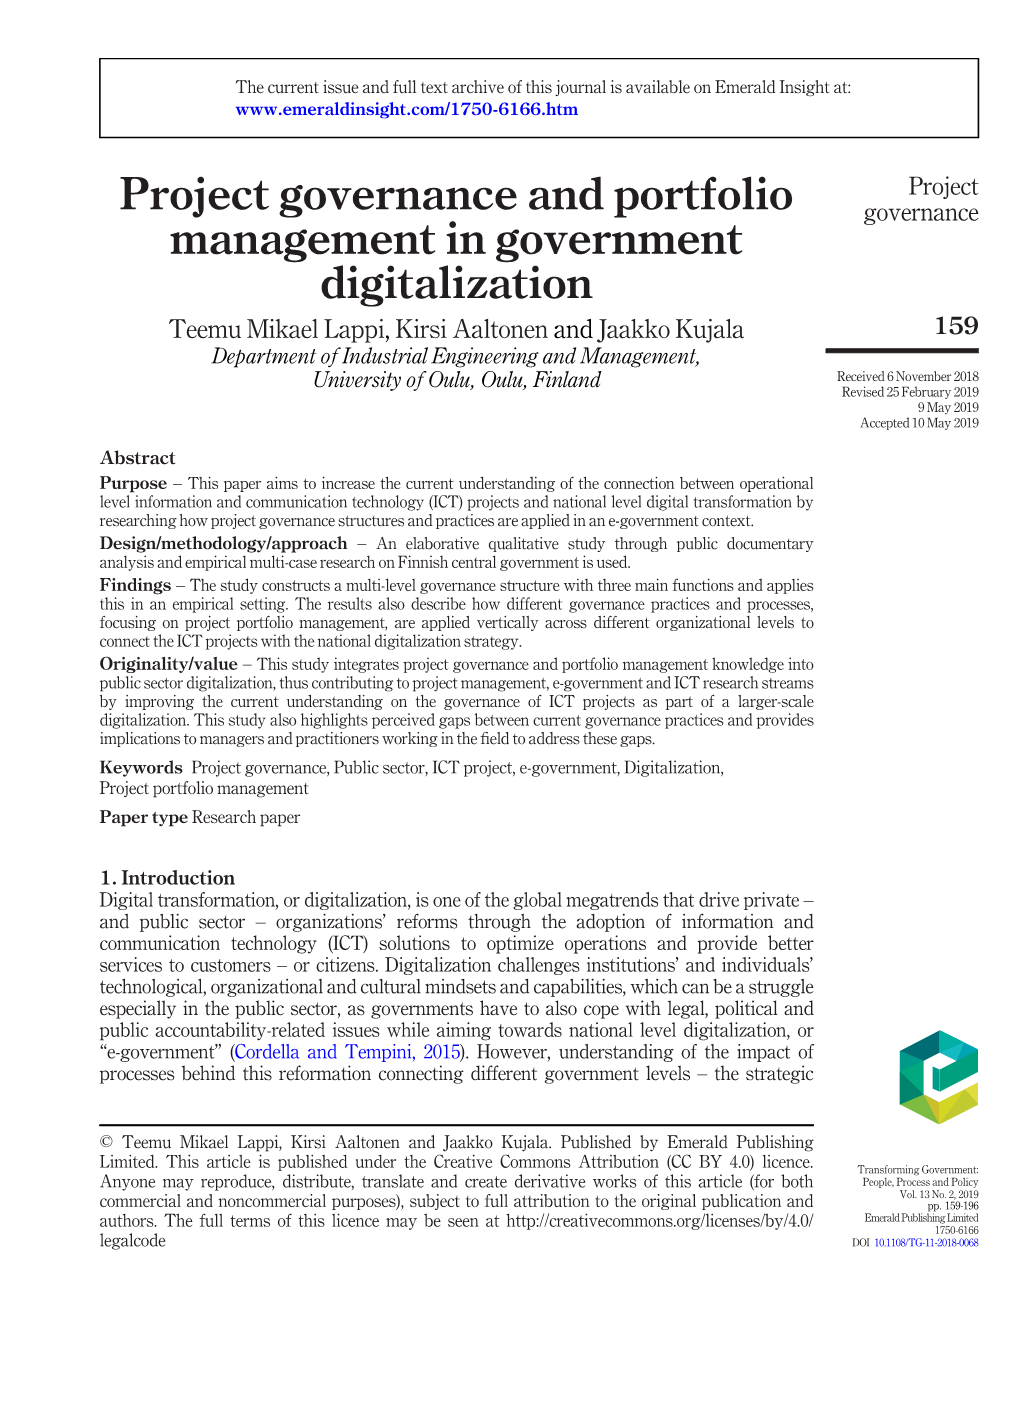 Project Governance and Portfolio Management In